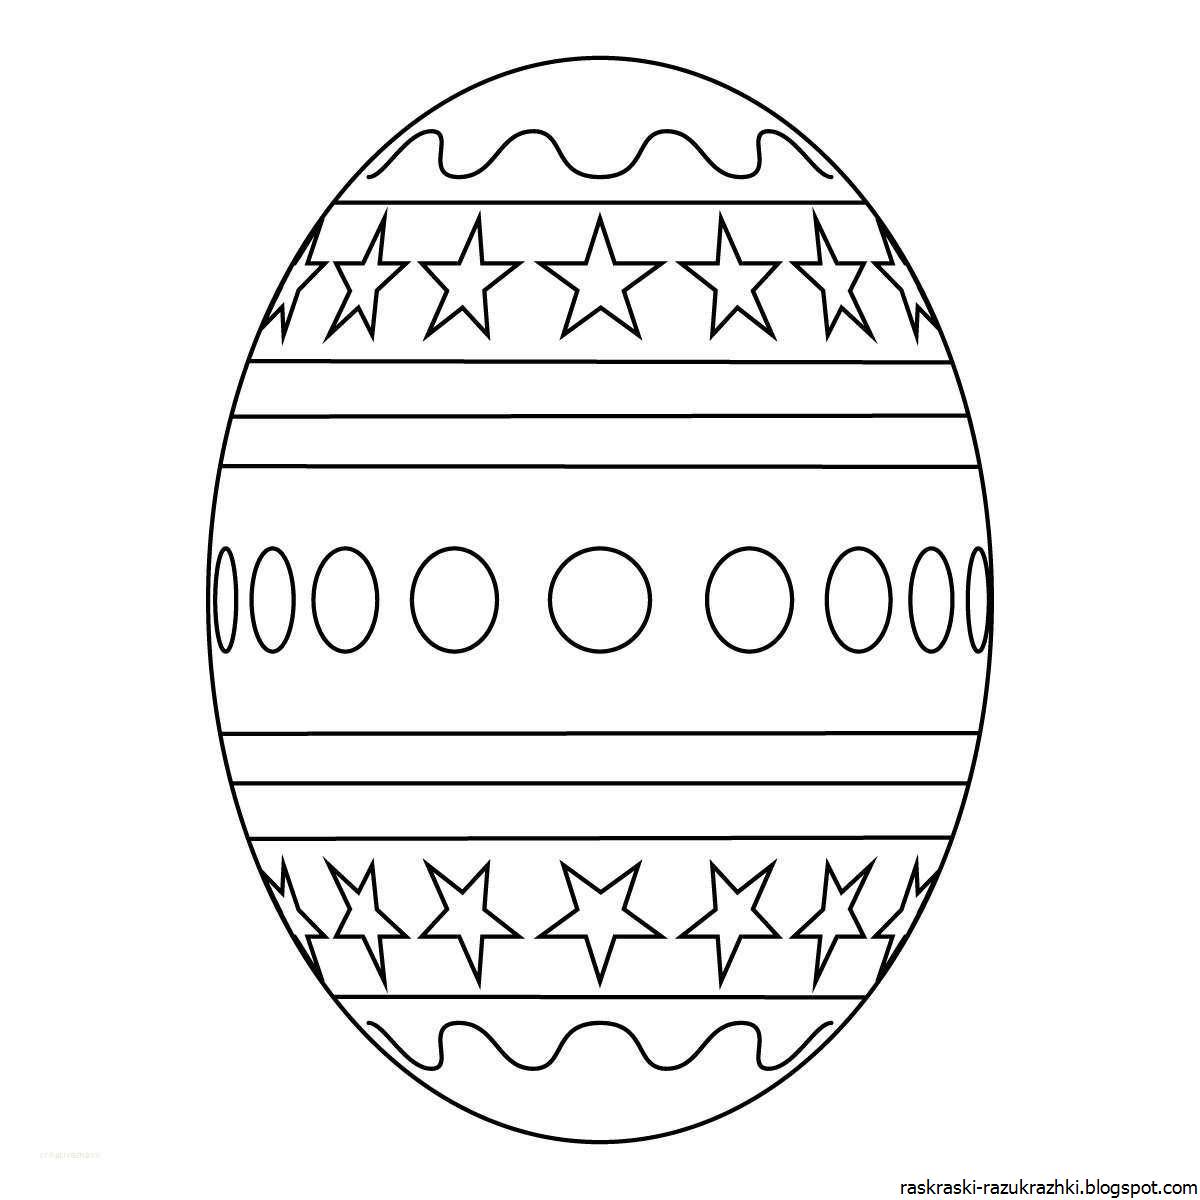 Great coloring egg